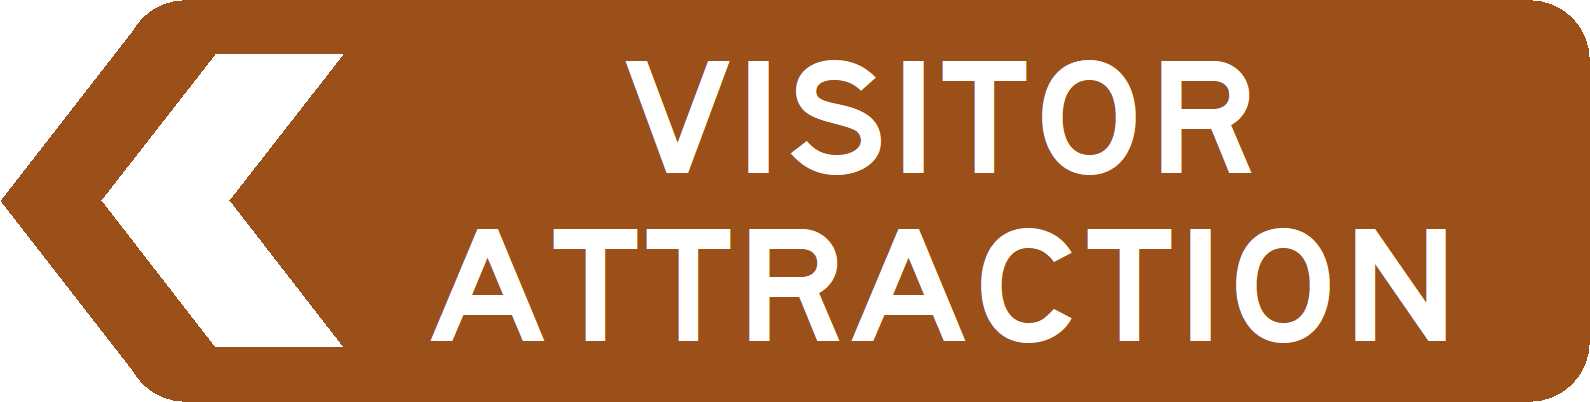 Visitor and Attraction Signage Example